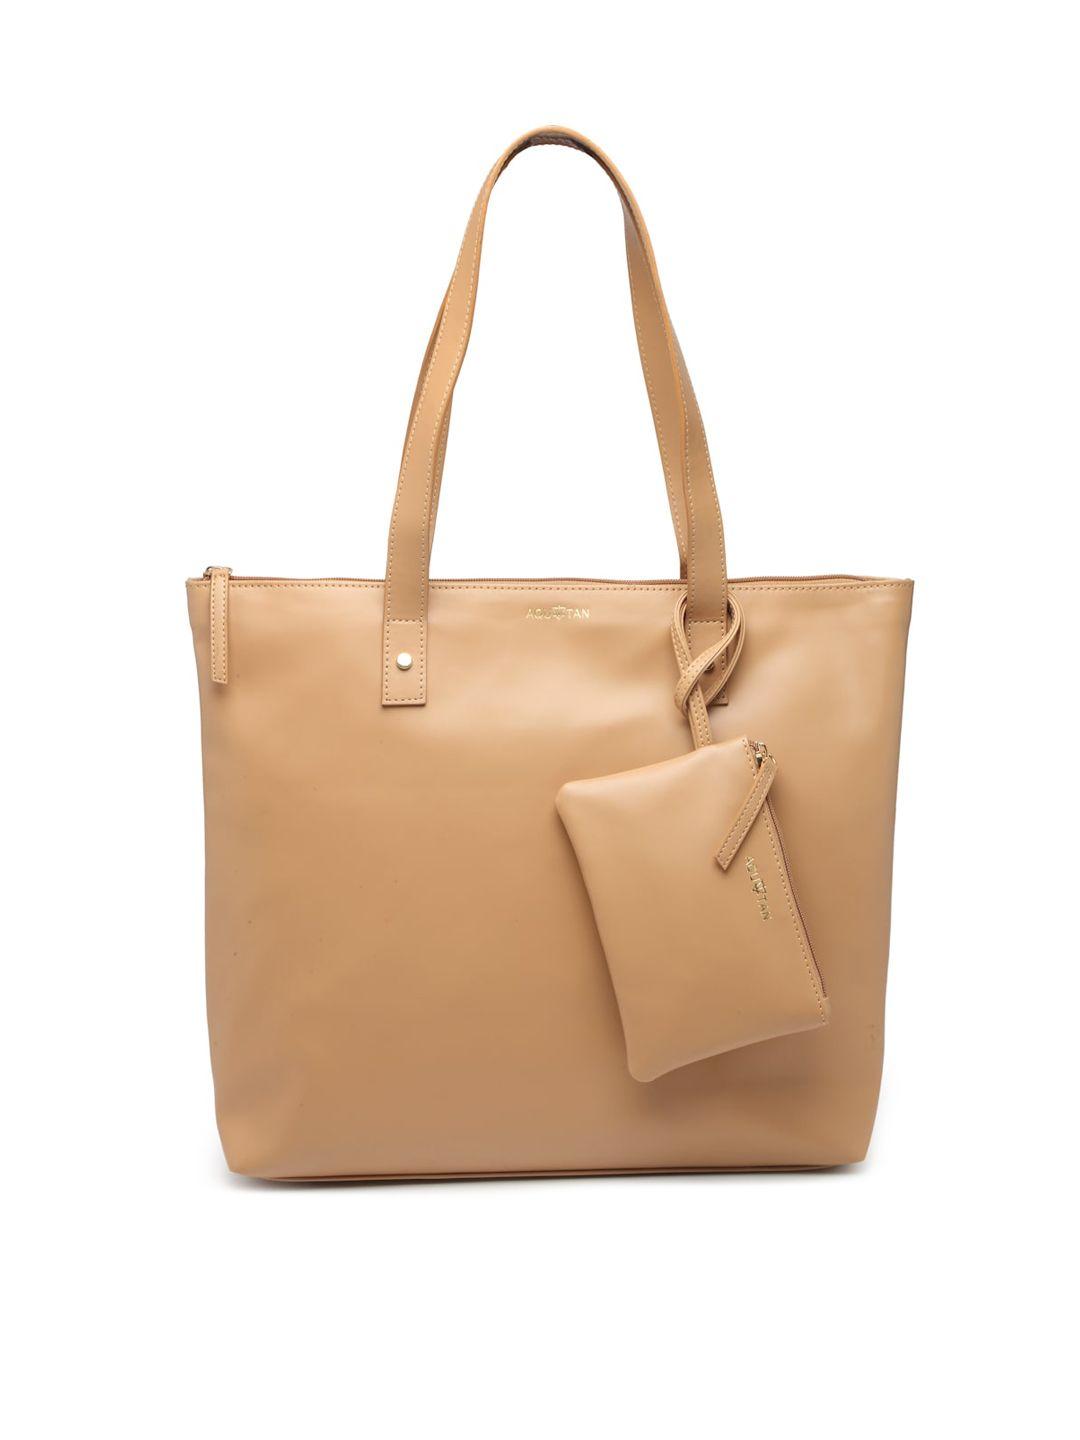 aquatan structured tote bag with pouch